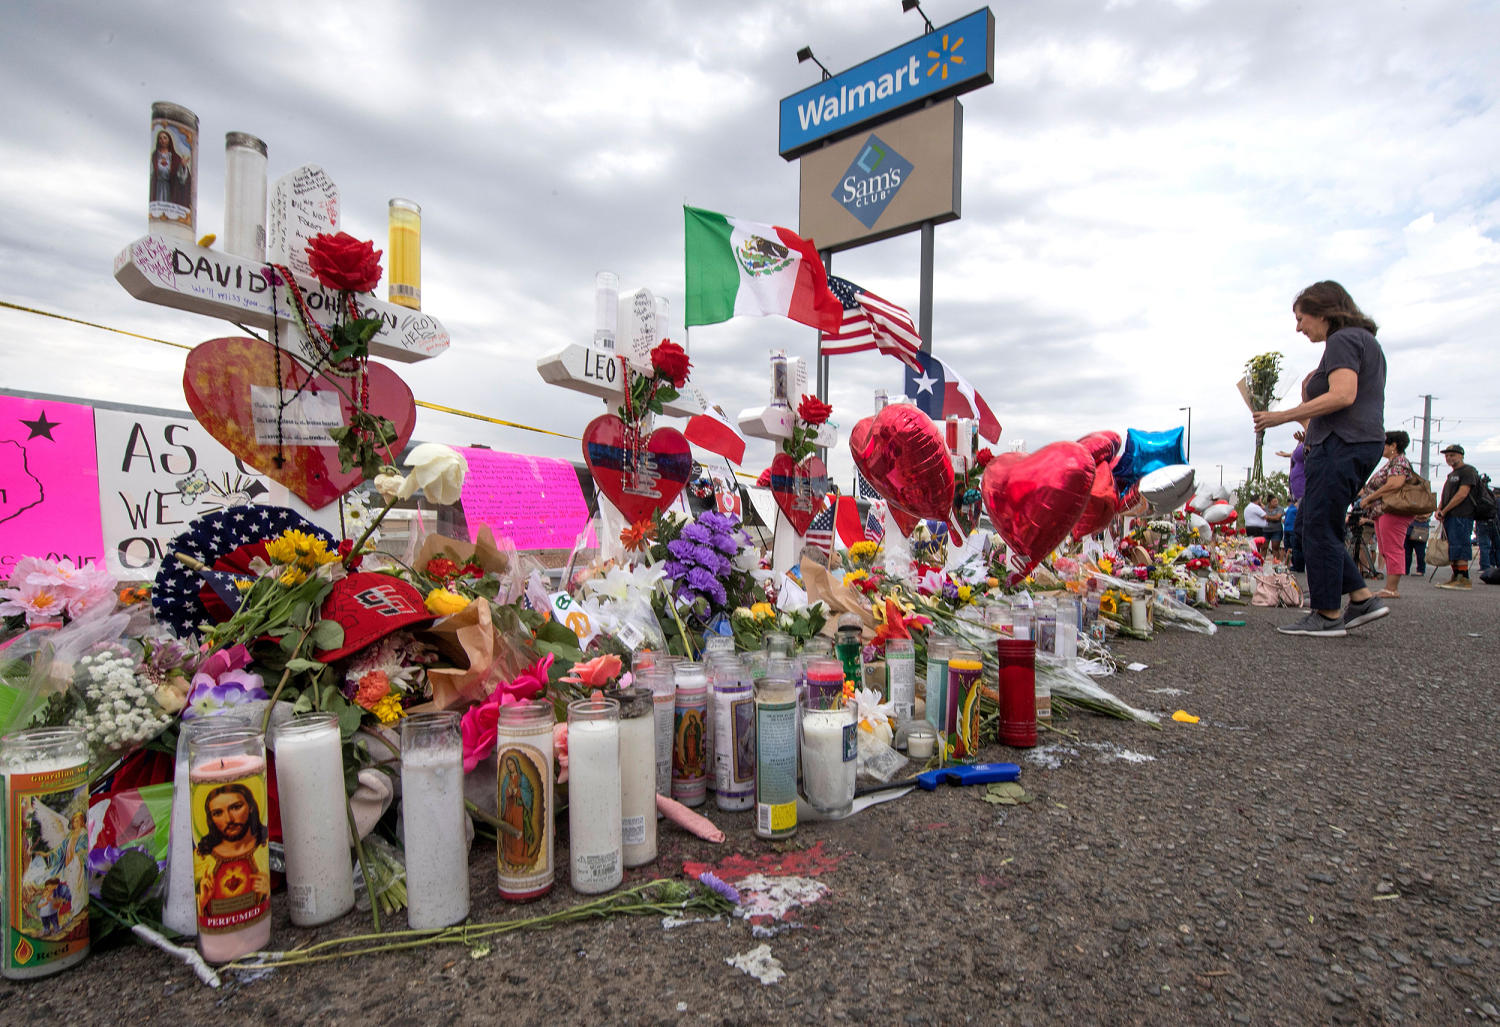 El Paso Walmart shooter who targeted Hispanics agrees to pay more than $5 million to families